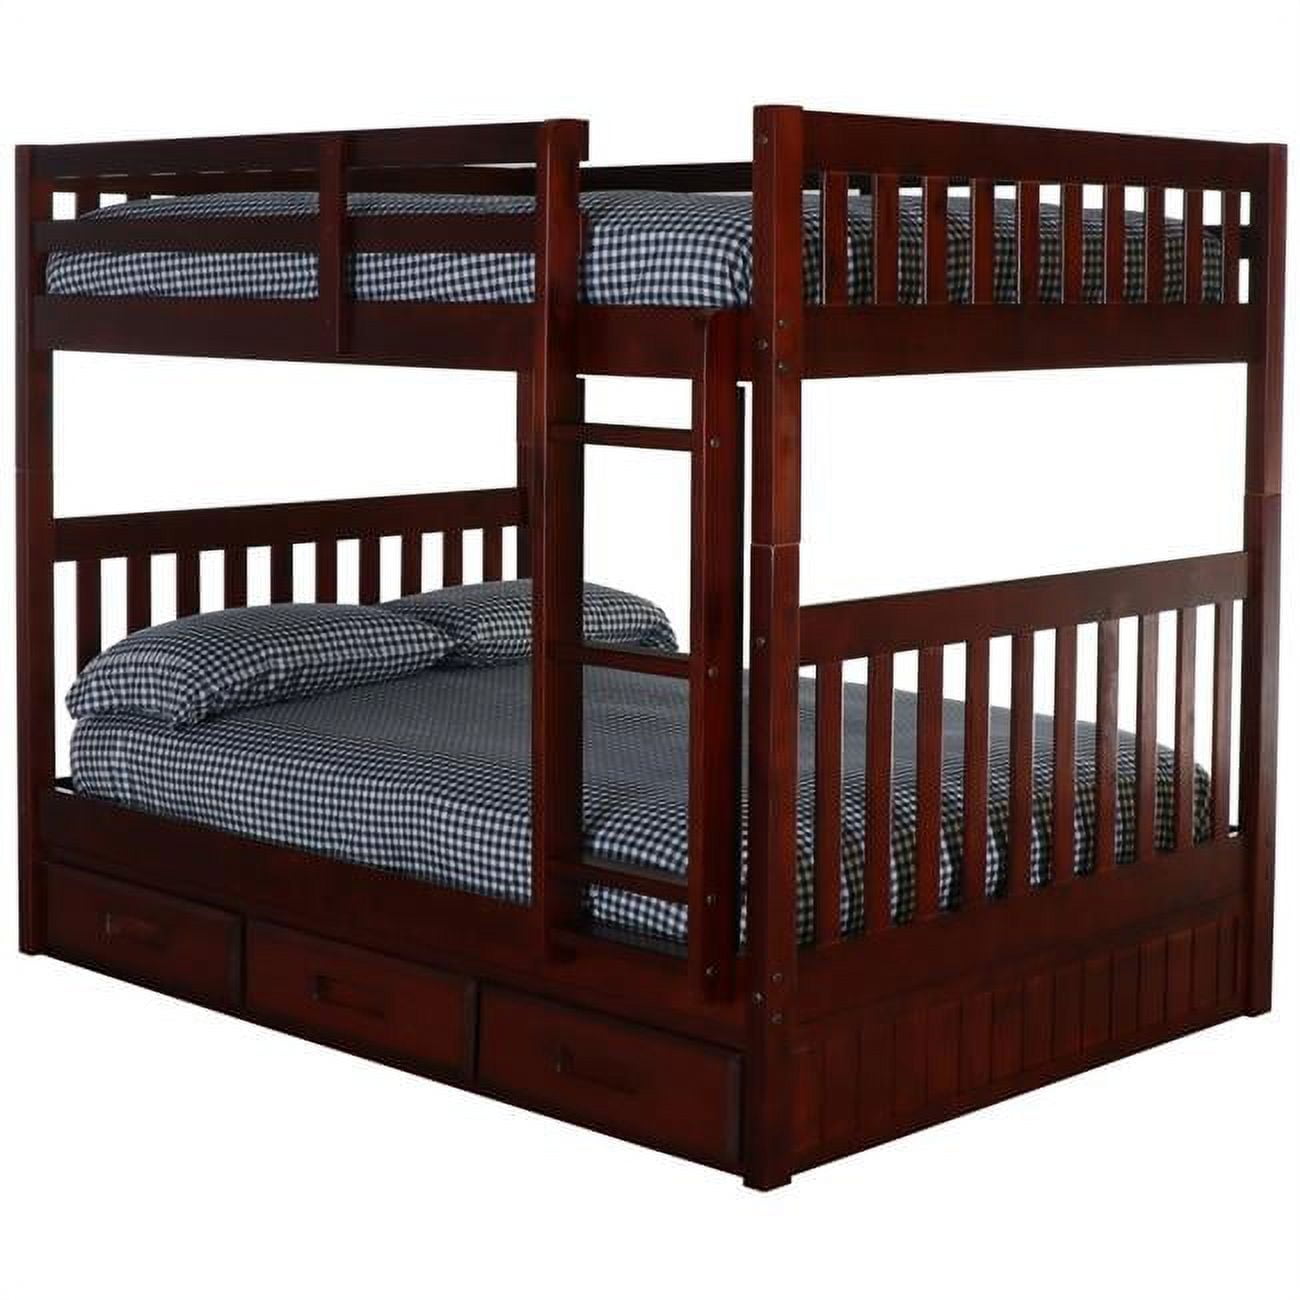 Picture of American Furniture Classics 82815-K3-KD 66 x 78 x 57 in. Full Over Full Bunk Bed with Three Drawers, Rich Merlot